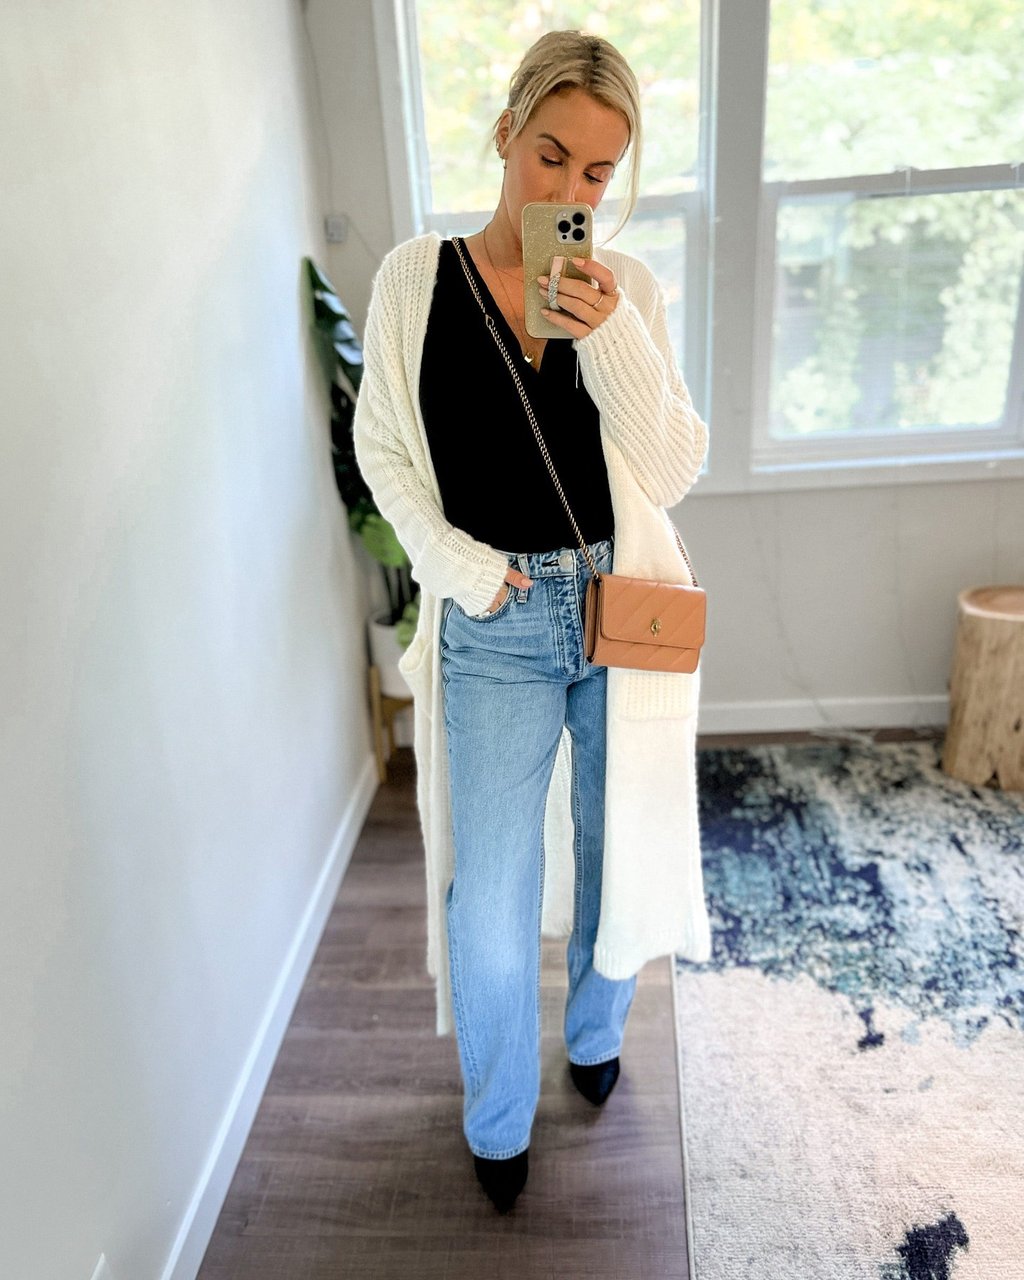 Wearing Tall Boots + Skinny Jeans: The Rules According to Scotti - The Mom  Edit